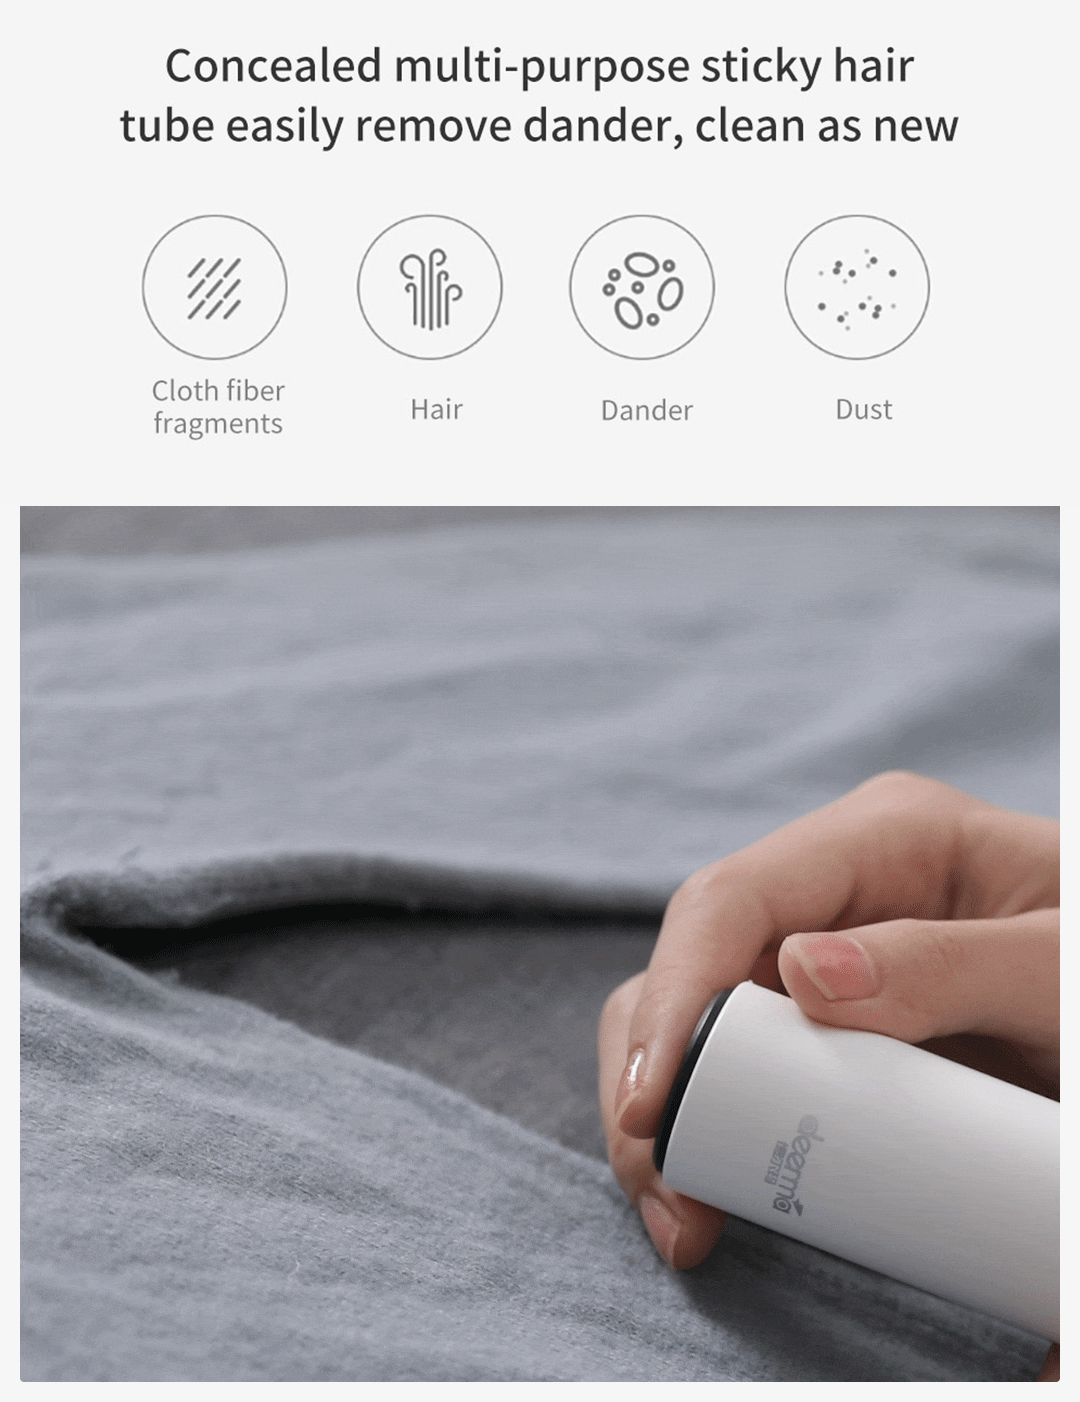 Fa7Da3E3 4Da1 4F9D 82Dd D6Fd228F63F4 Xiaomi &Lt;Strong&Gt;Deerma Clothes Sticky Hair Multi-Function Trimmer Charge Plug-In 7000R / Min Motor Fast Removal Ball&Lt;/Strong&Gt; Concealed Multi-Purpose Sticky Hair Tube Easily Remove Dander, Clean As New. The &Lt;Strong&Gt;Sticky Hair Tube&Lt;/Strong&Gt; Is Hidden At The Handle To Maximize The Space Utilization. Pulling It Out Can Absorb The Residual Dander, Effectively Preventing The Dander And The Clothes Fiber From Winding Up Again. Easy To Operate, Make Clothes New And Fashion Https://Youtu.be/Cbkpzs7Ufpa Xiaomi Xiaomi Deerma Portable Lint Remover Multi-Function Usb Charging